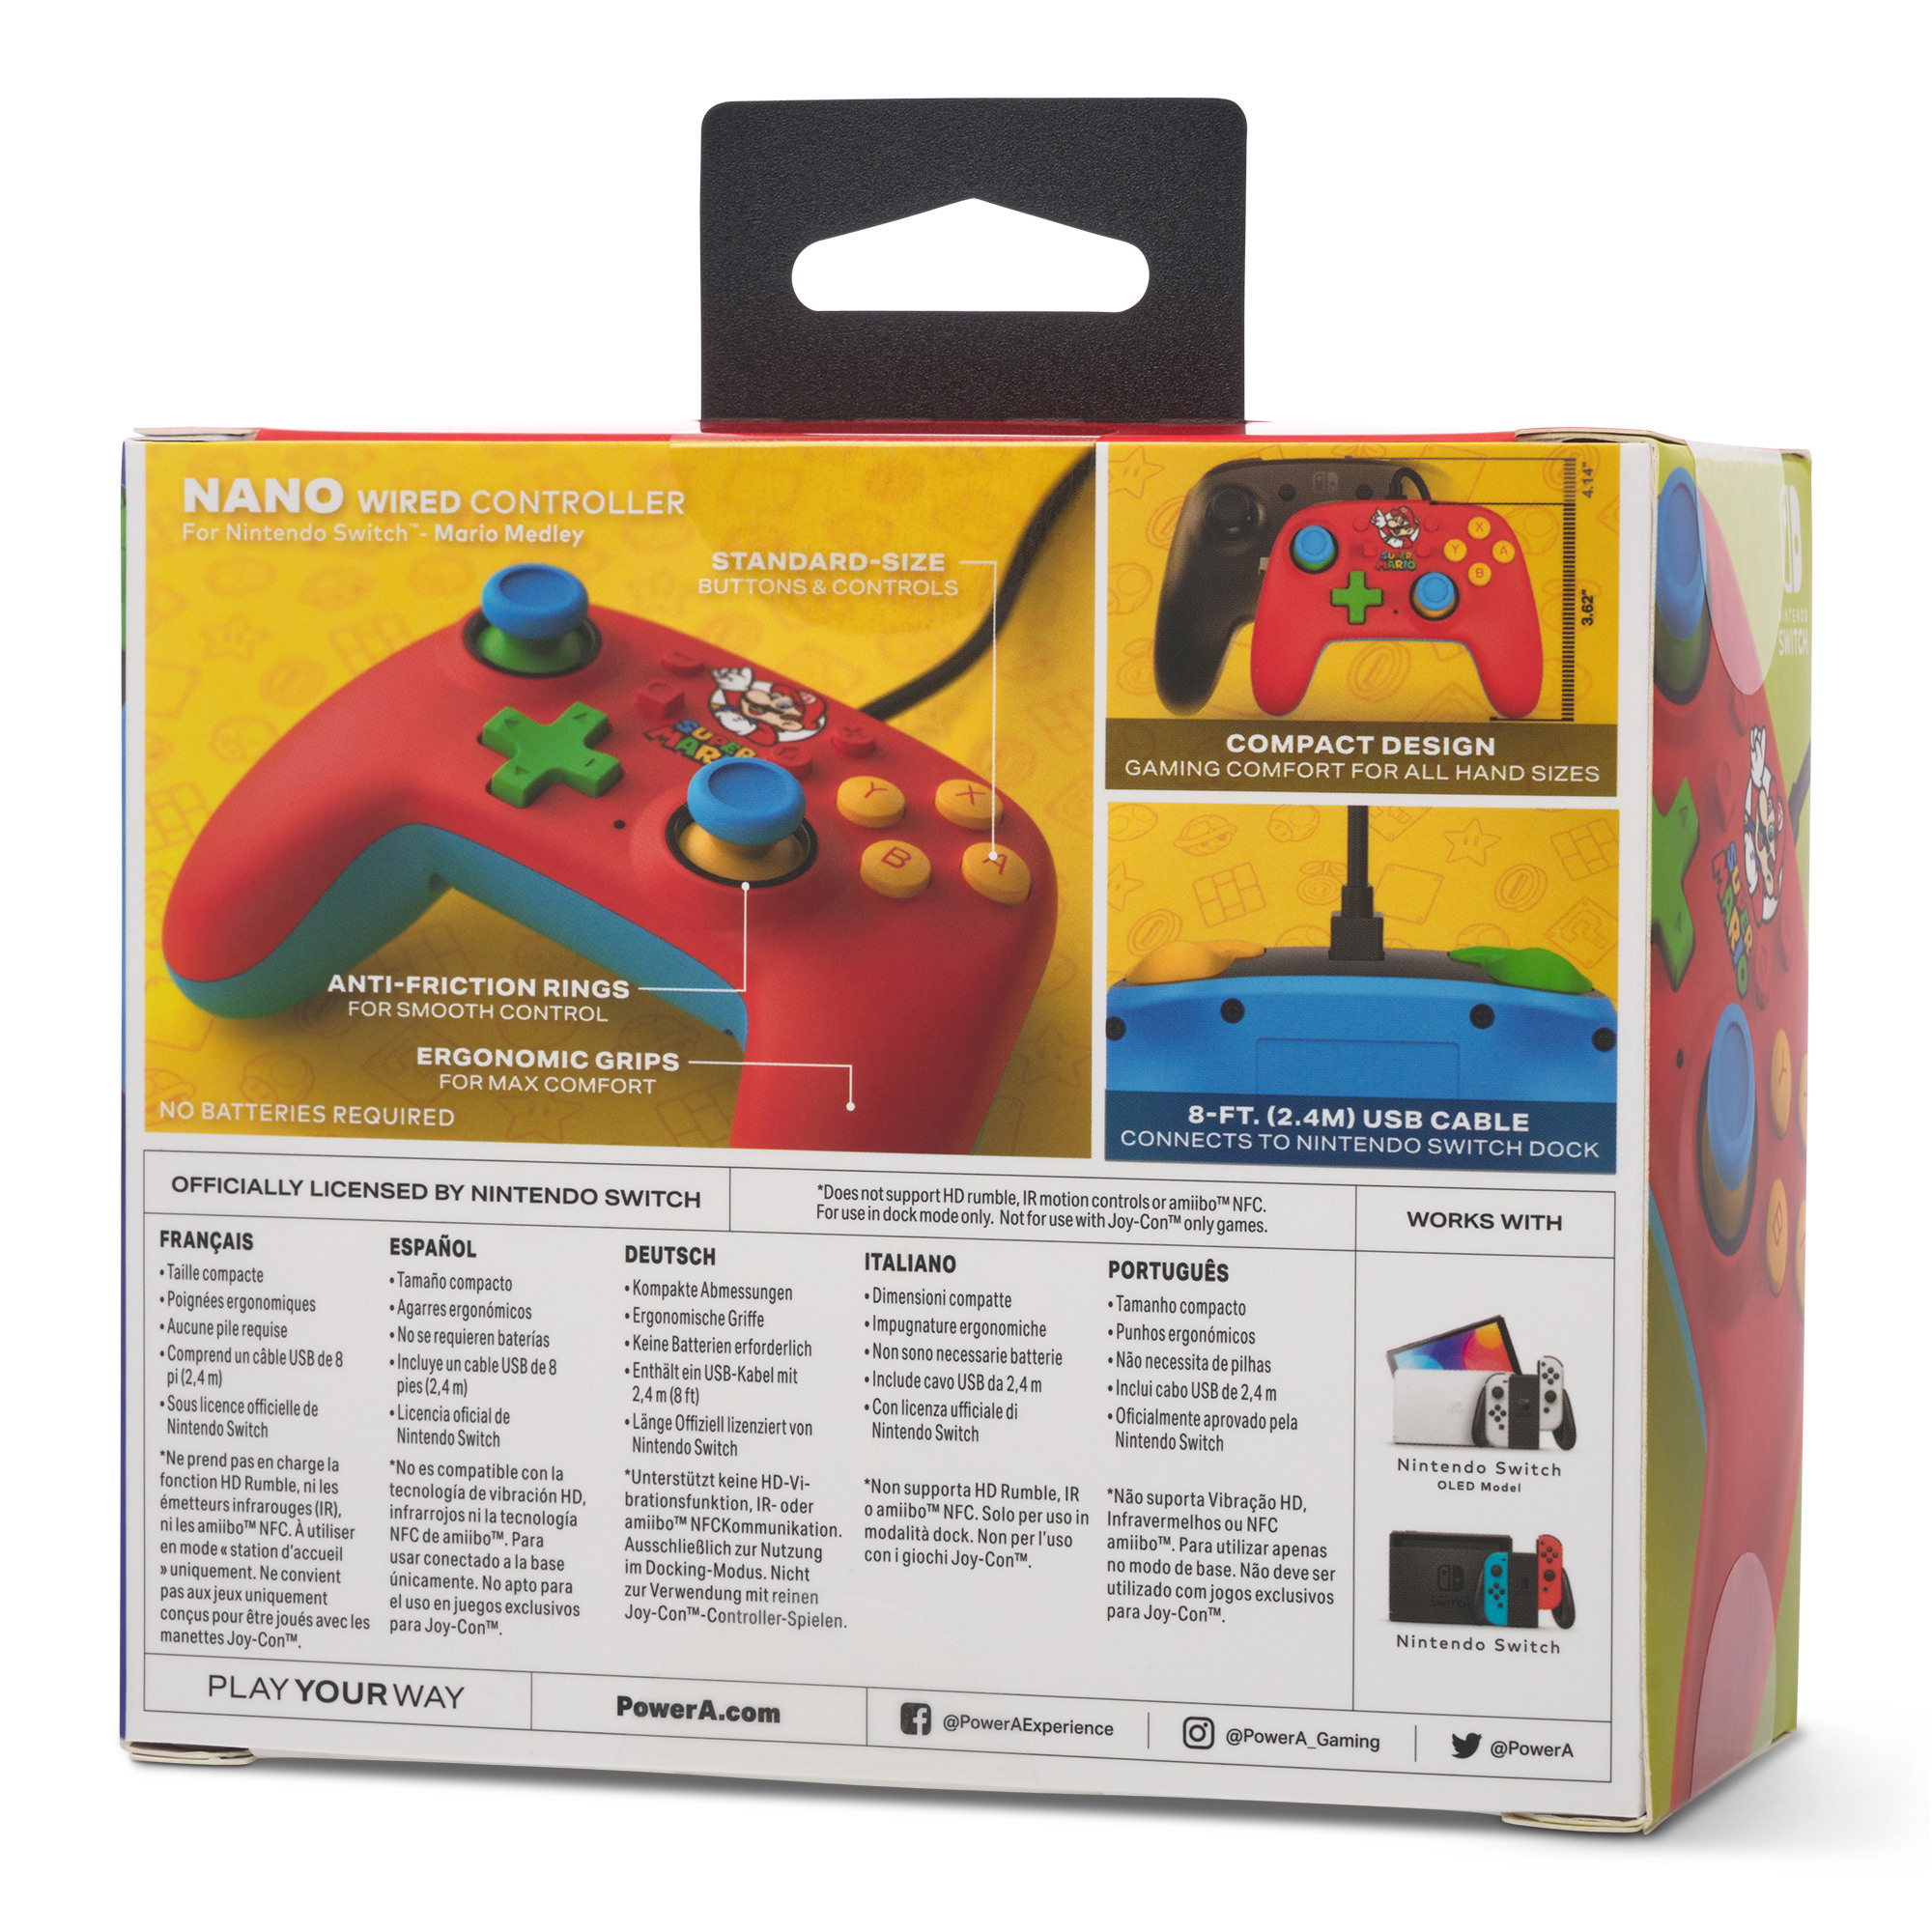 POWER A Wired Nano Controller NSW NSGP0123-01 Mario Medley, Red